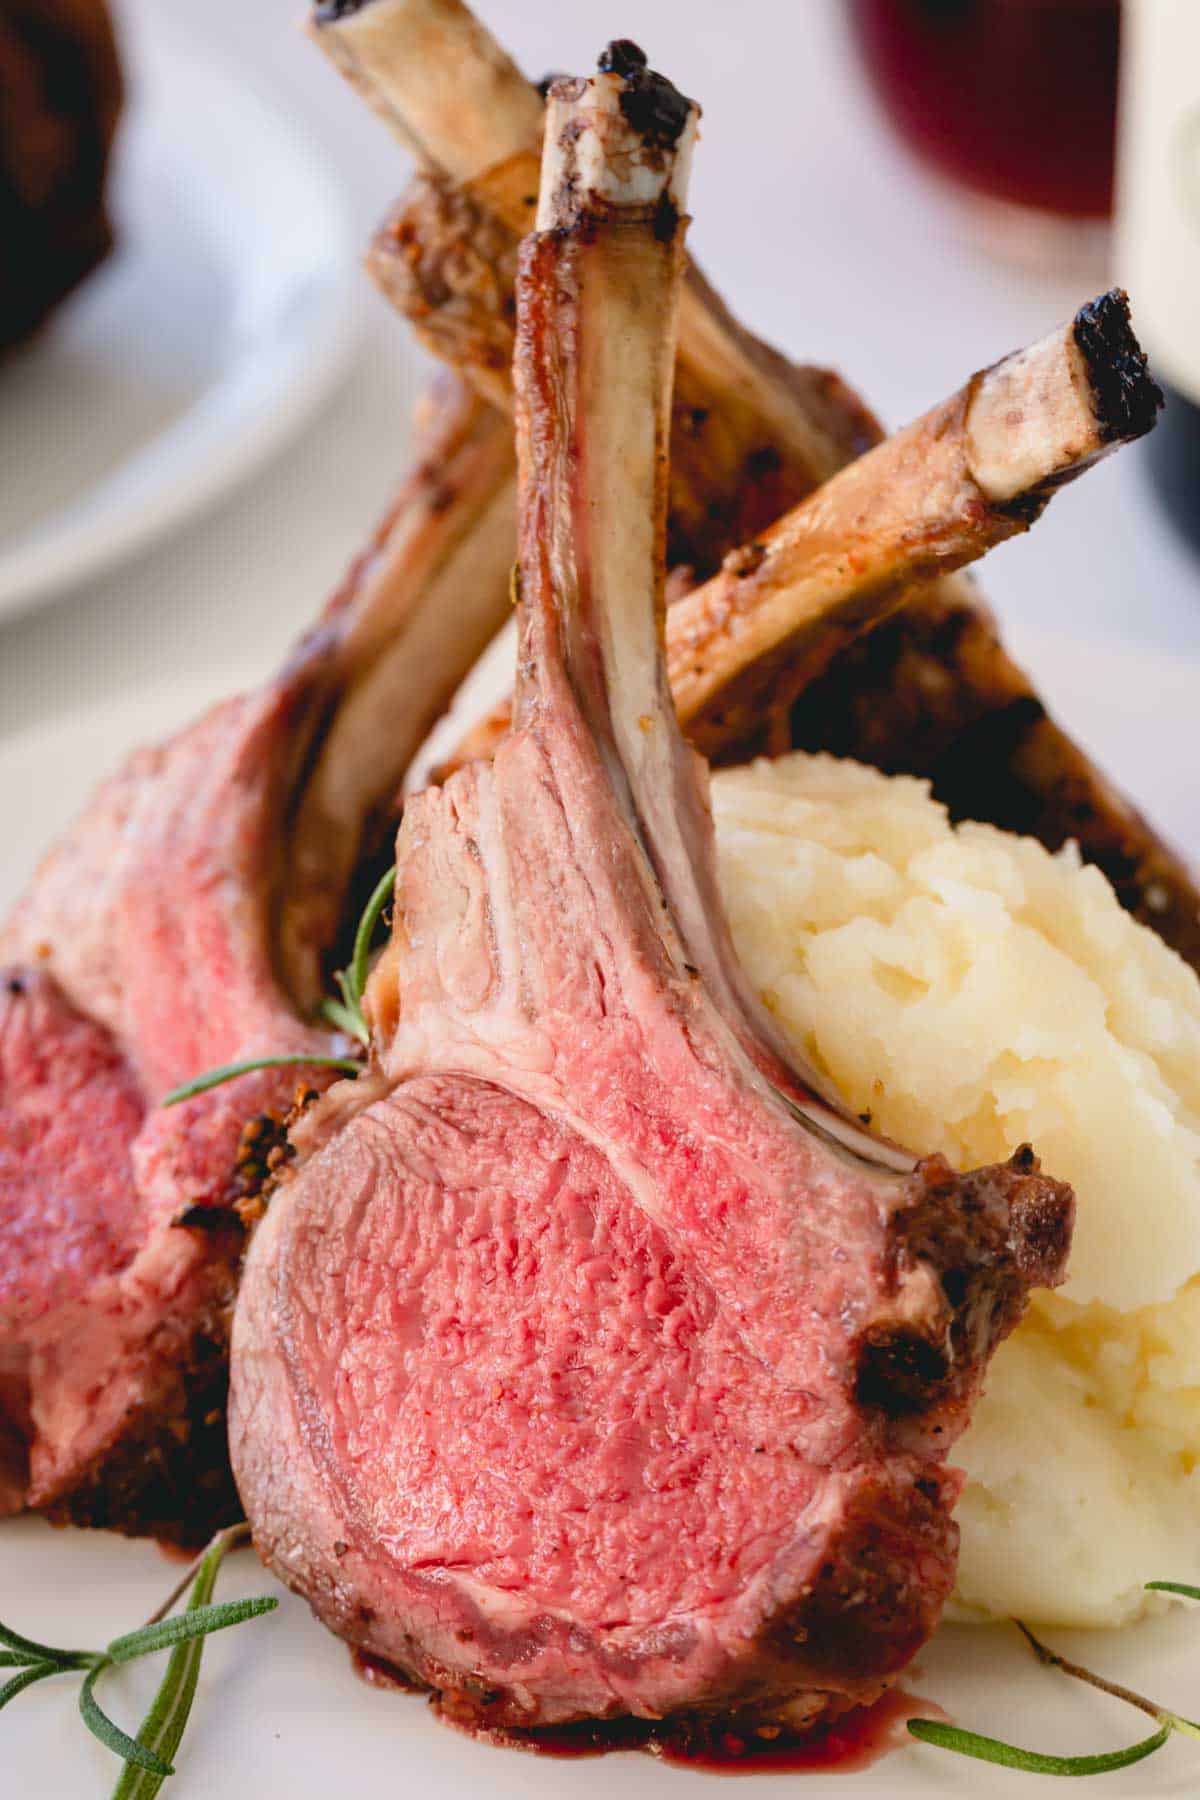 Sliced roasted rack of lamb with mashed potatoes.